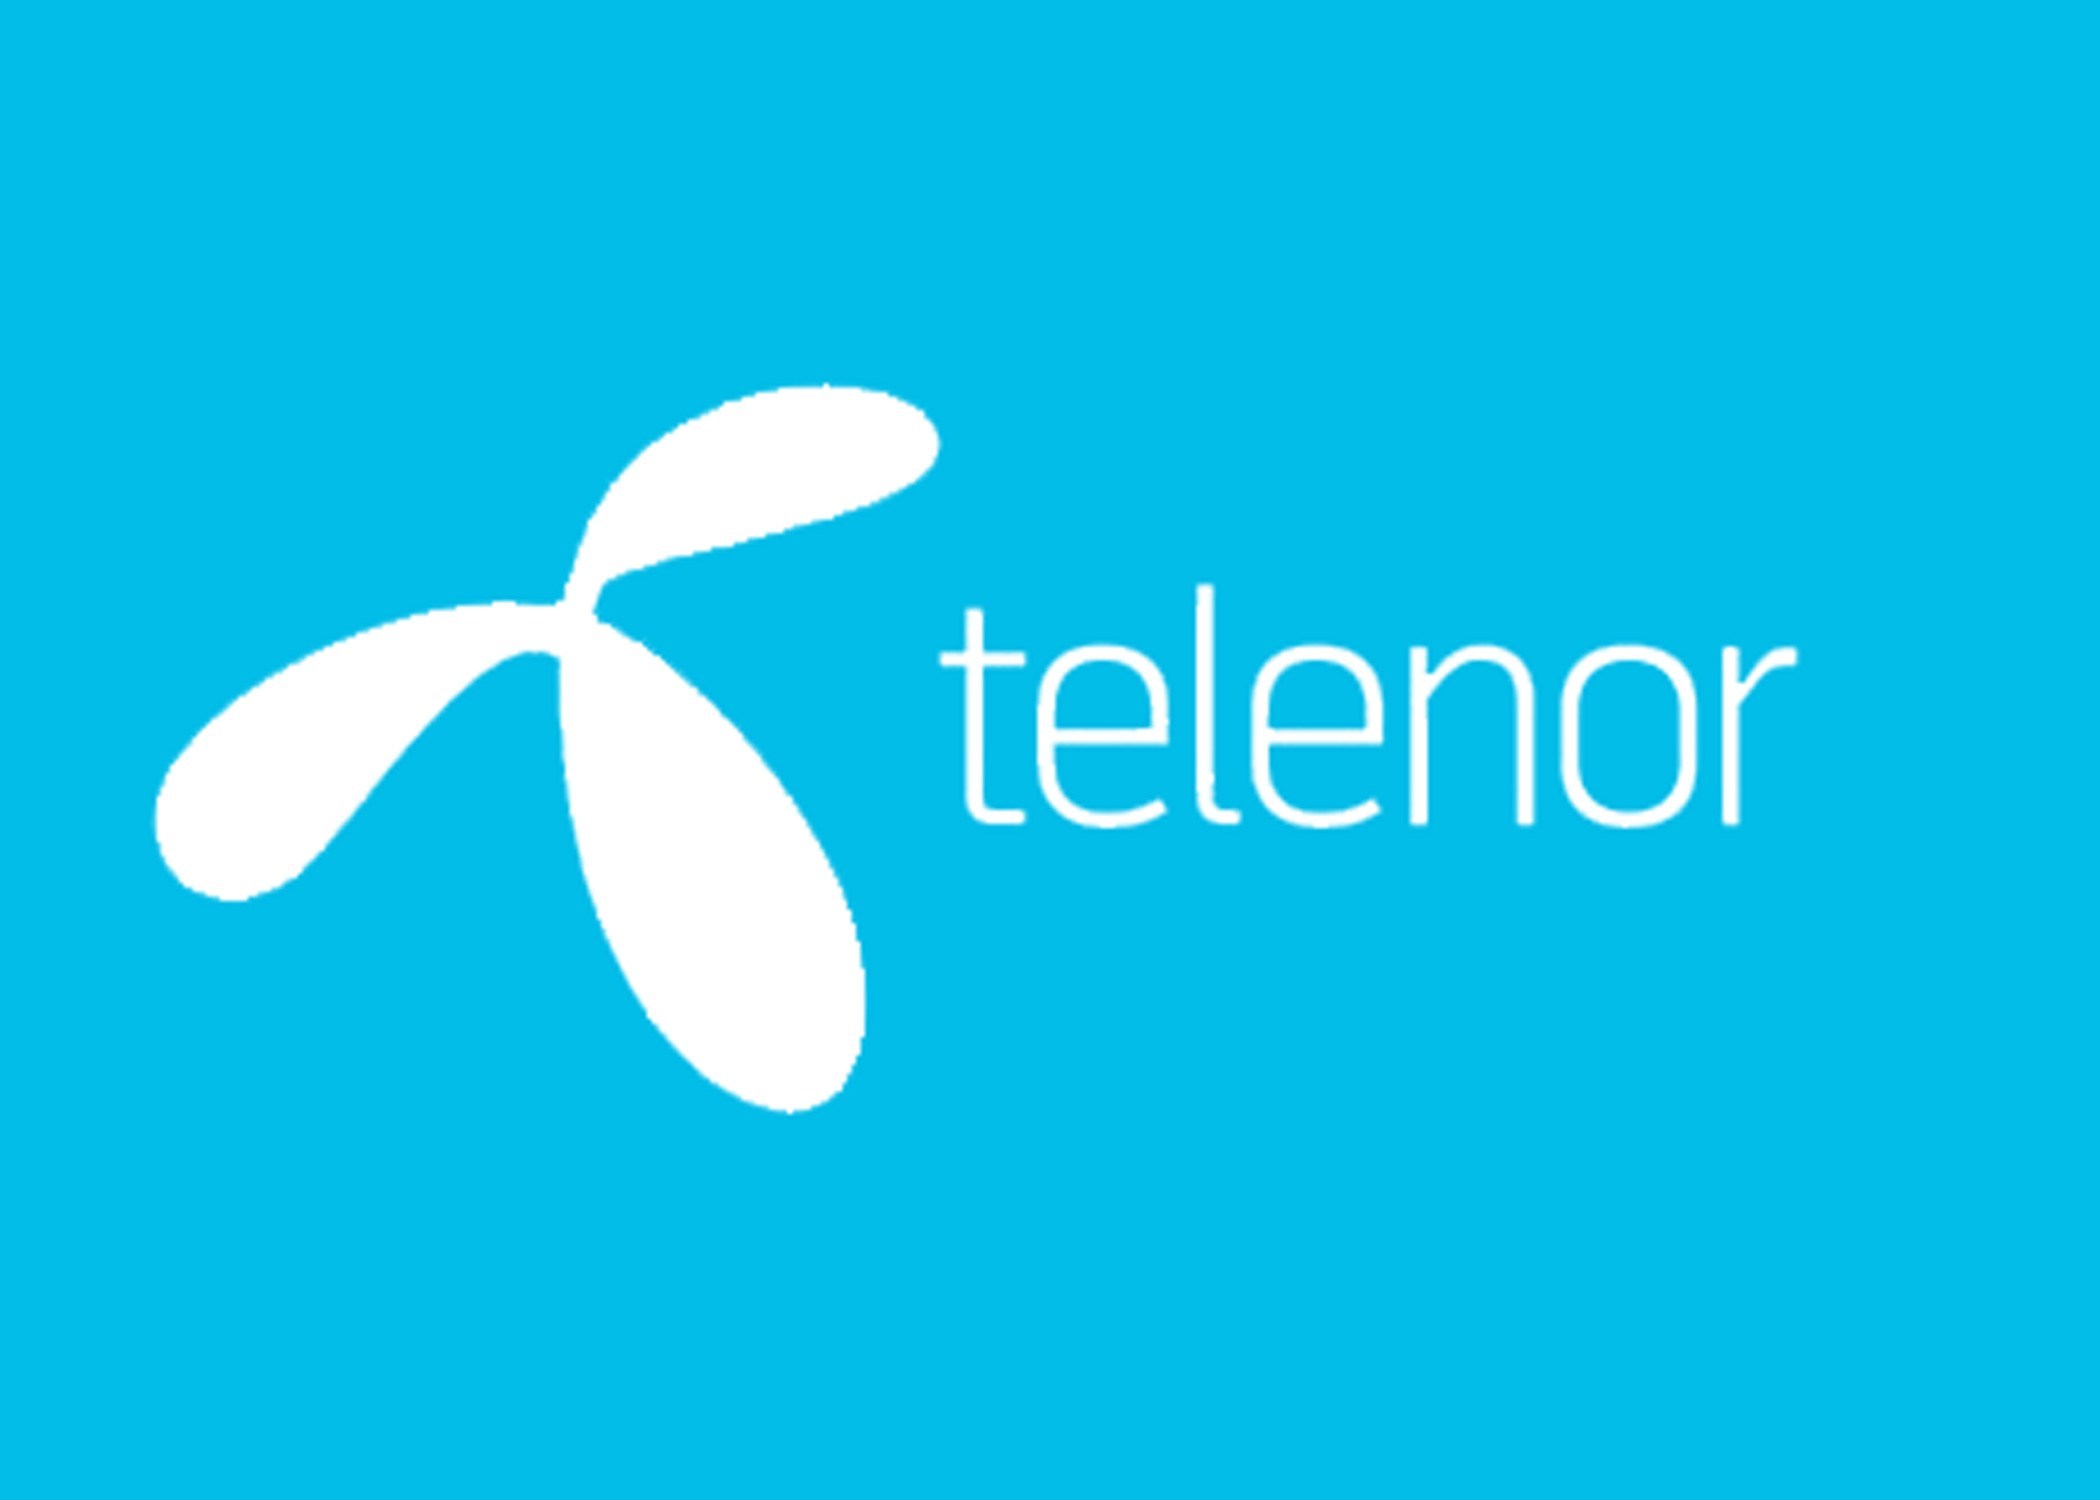 Telenor is one of the best service providers. Not just the mainstream telecommunication, but their 4G, 3G, and 2G services are up to the mark as well. Through the years, Telenor has proved that the network has always outdone itself in terms of service and providing the best for its consumers. There are always new packages, offers, and deals springing up for the ease of the users. Among it all, YouTube Telenor Packages are one of the bests that any network provides. From the service to the streaming, everything is perfect. If you are a Telenor user, are enticed to be one, or are just looking to compare the YouTube packages so you can decide which SIM to purchase, let’s talk about multiple YouTube Telenor packages and their benefits today. Why Get A YouTube Telenor Package? Everyone is streaming the internet all the time. You might have a 4G or 3G package depending on your area of service or SIM type, but YouTube requires dedicated packages because of the amount of data it consumes. Moreover, when you have a package especially for streaming those endless videos on the platform, you do not worry about the package running out and you not having the data to fulfill the other user needs. In short, it is better to subscribe to a dedicated package, if you are an avid YouTube fan to save yourself from any hassle or trouble. Telenor YouTube Packages Now that we might have convinced you to get yourself a Telenor SIM if you don’t have already and get yourself subscribed to the packages, it is about time we tell you about the list of multiple packages that the network provides. The packages are for only prepaid users and the rates can vary depending on the city you are subscribing to them for, though we have mentioned the right packages as per the geographical location, so you don’t have to worry. Moreover, if you have subscribed to a 4G bundle but are in an area where it doesn’t work, you need not worry. Telenor knows how to solve your problems, as these bundles can work on 2G and 3G as well. The bundle will expire at its expiration date, but if you eat up all the data, it will definitely expire beforehand. Now that the essentials are out of the way, here are the multiple YouTube Telenor Packages that you can choose to subscribe from: